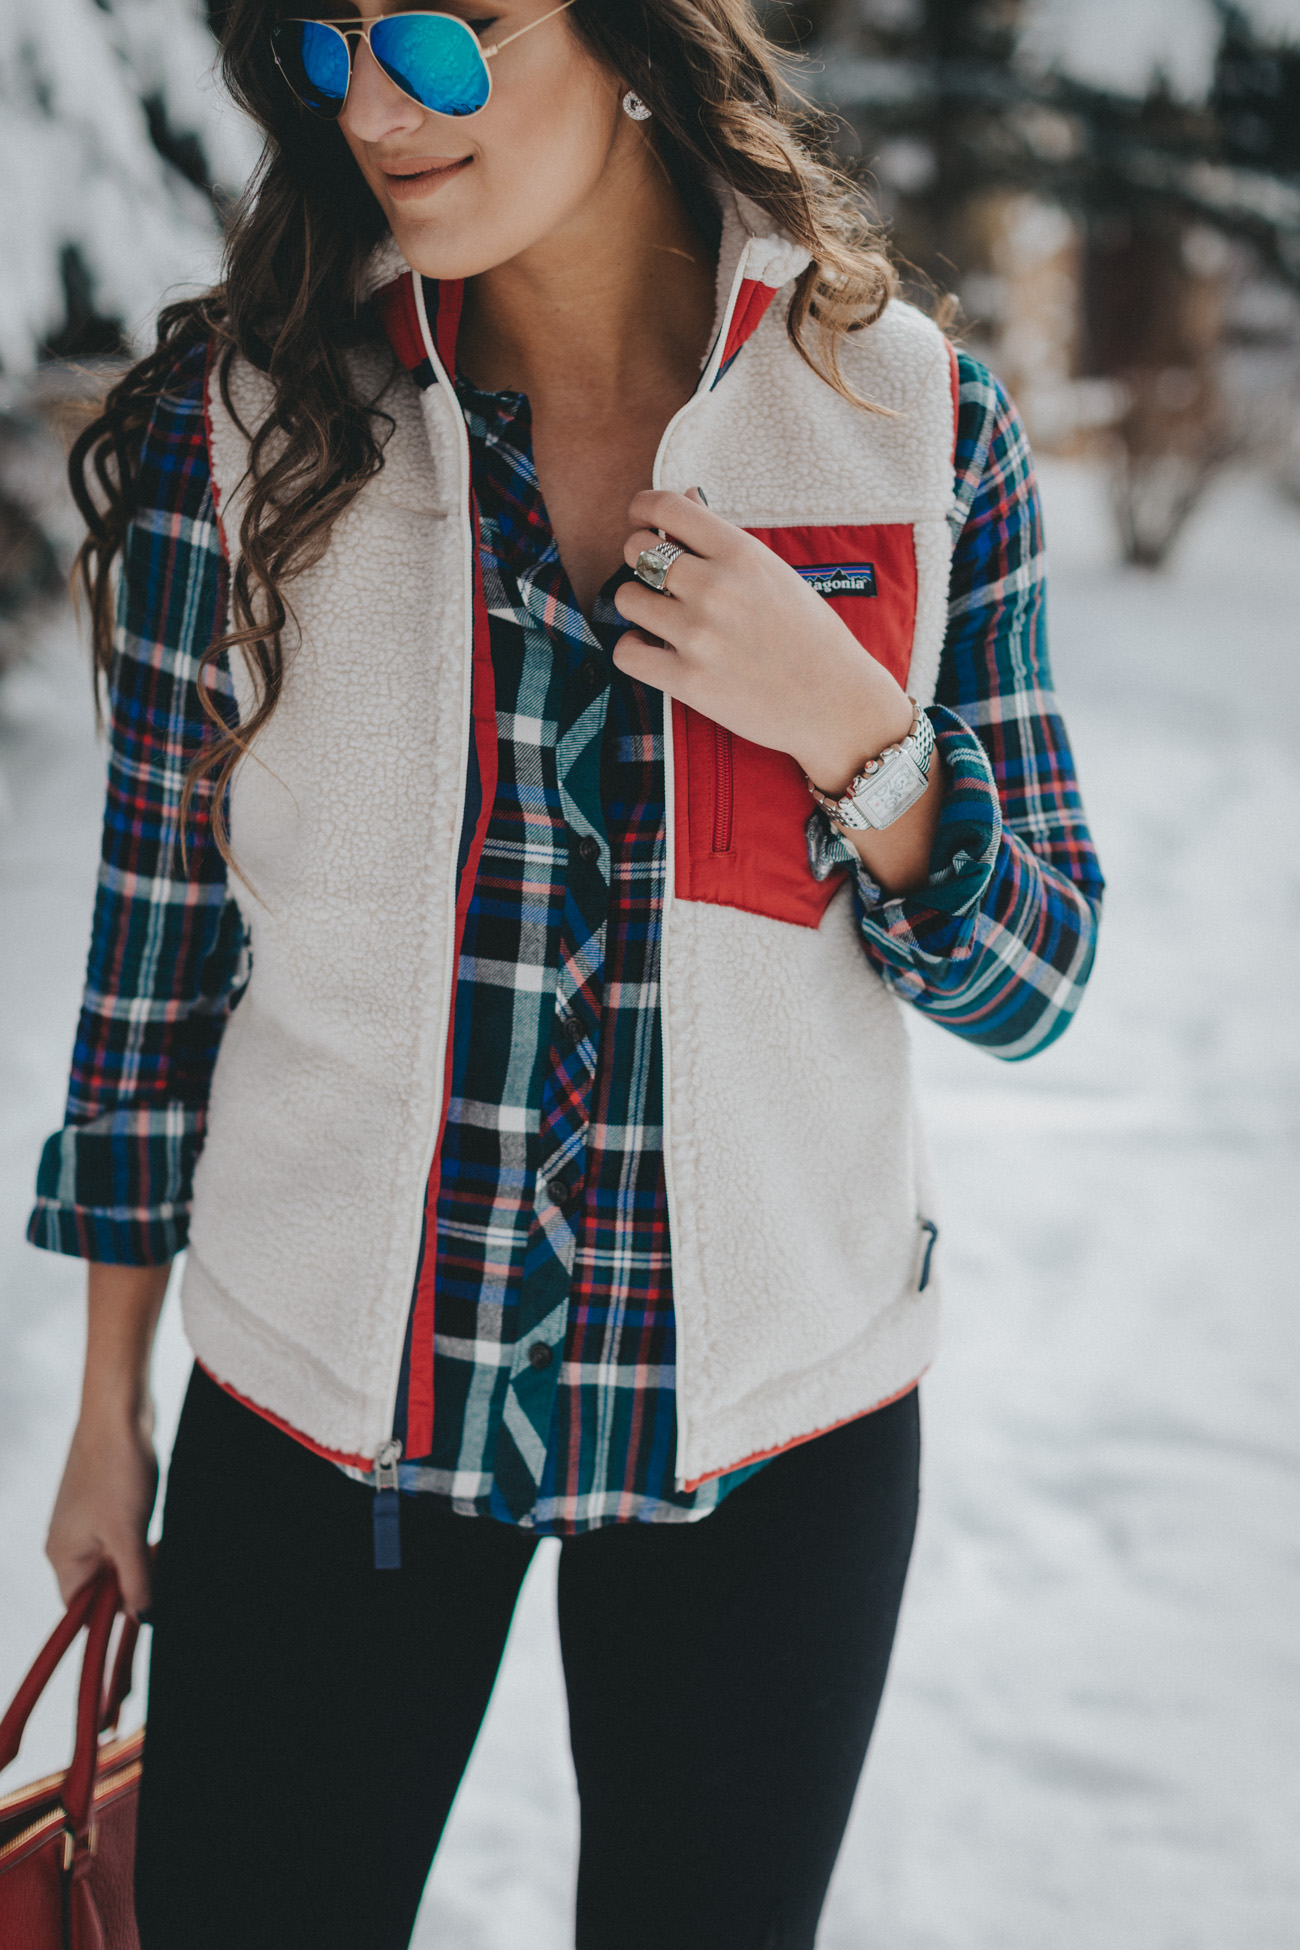 patagonia classic retro x fleece vest, patagonia vest, patagonia fleece vest, plaid flannel shirt, red duckboots, duck boots, bean boots, sperry duck boots, colorado style, snow style, snow outfit // grace wainwright a southern drawl